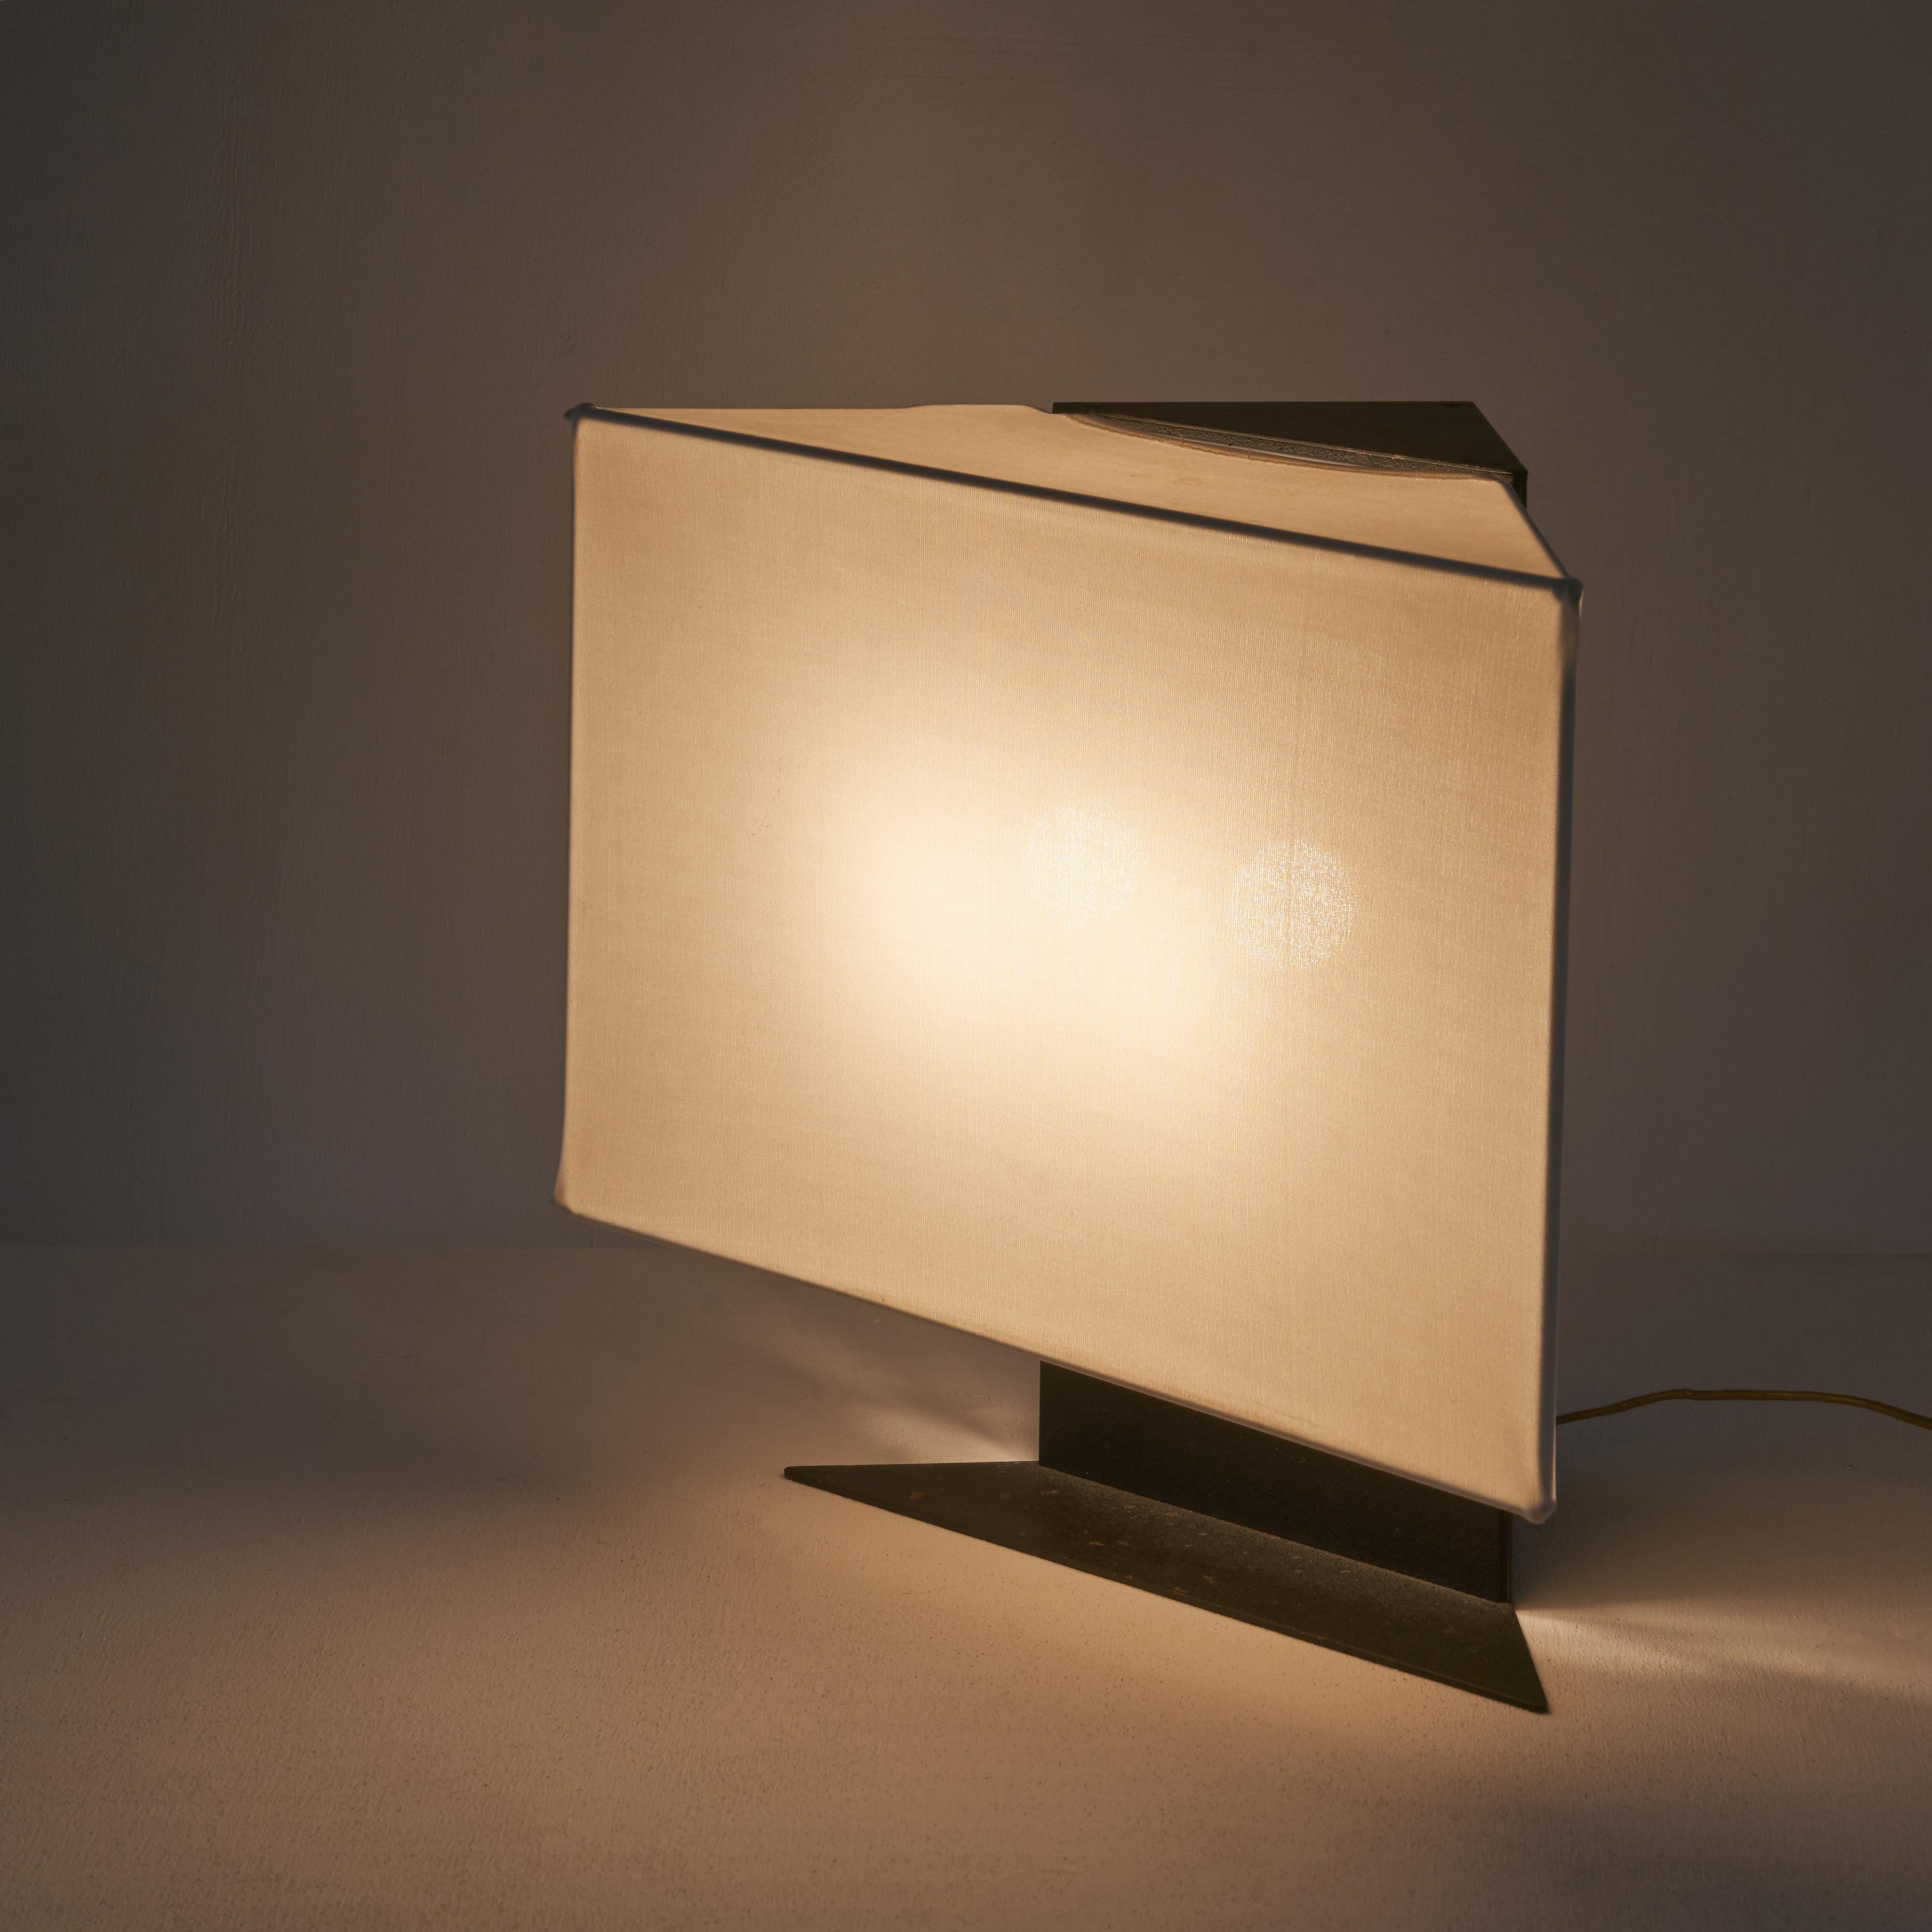 Cini Boeri (1924-2020) Accademia table lamp for Artemide. Great post-modern piece with a simple but interesting design. Cini Boeri was most certainly thinking of photographic equipment when she designed the Accademia-series for Artemide in 1978,